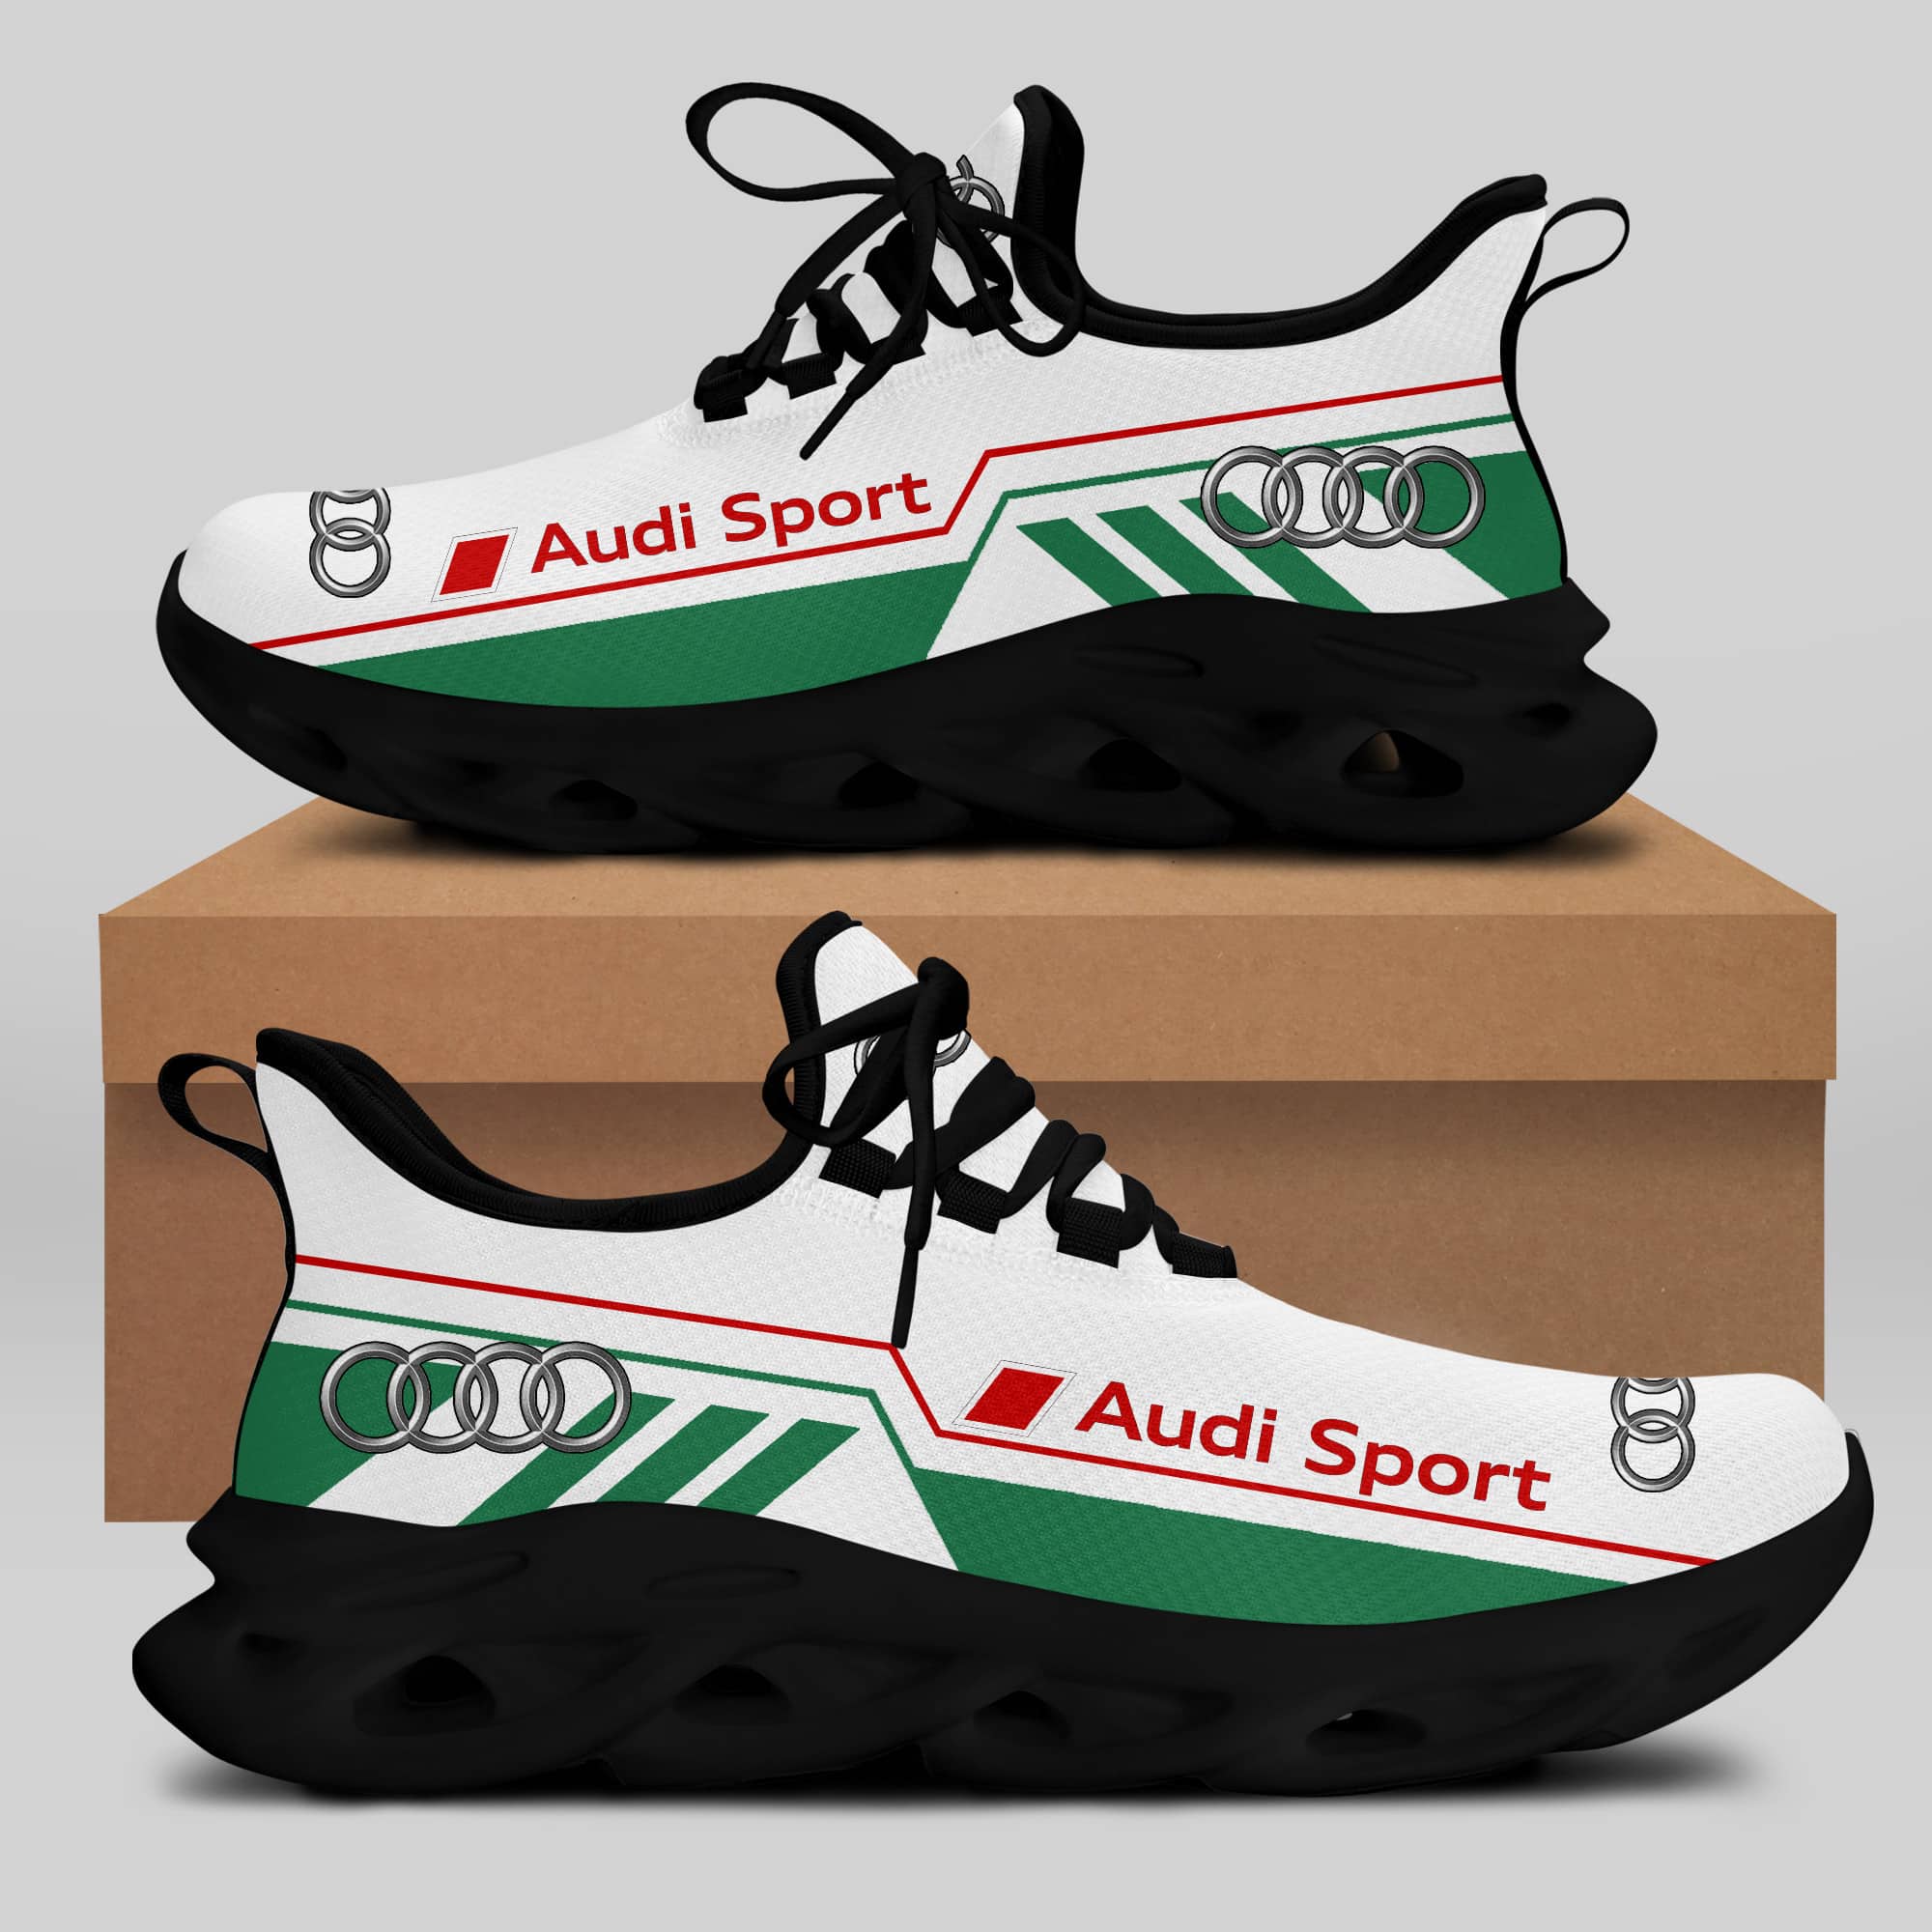 Audi Sport Running Shoes Max Soul Shoes Sneakers Ver 21 2